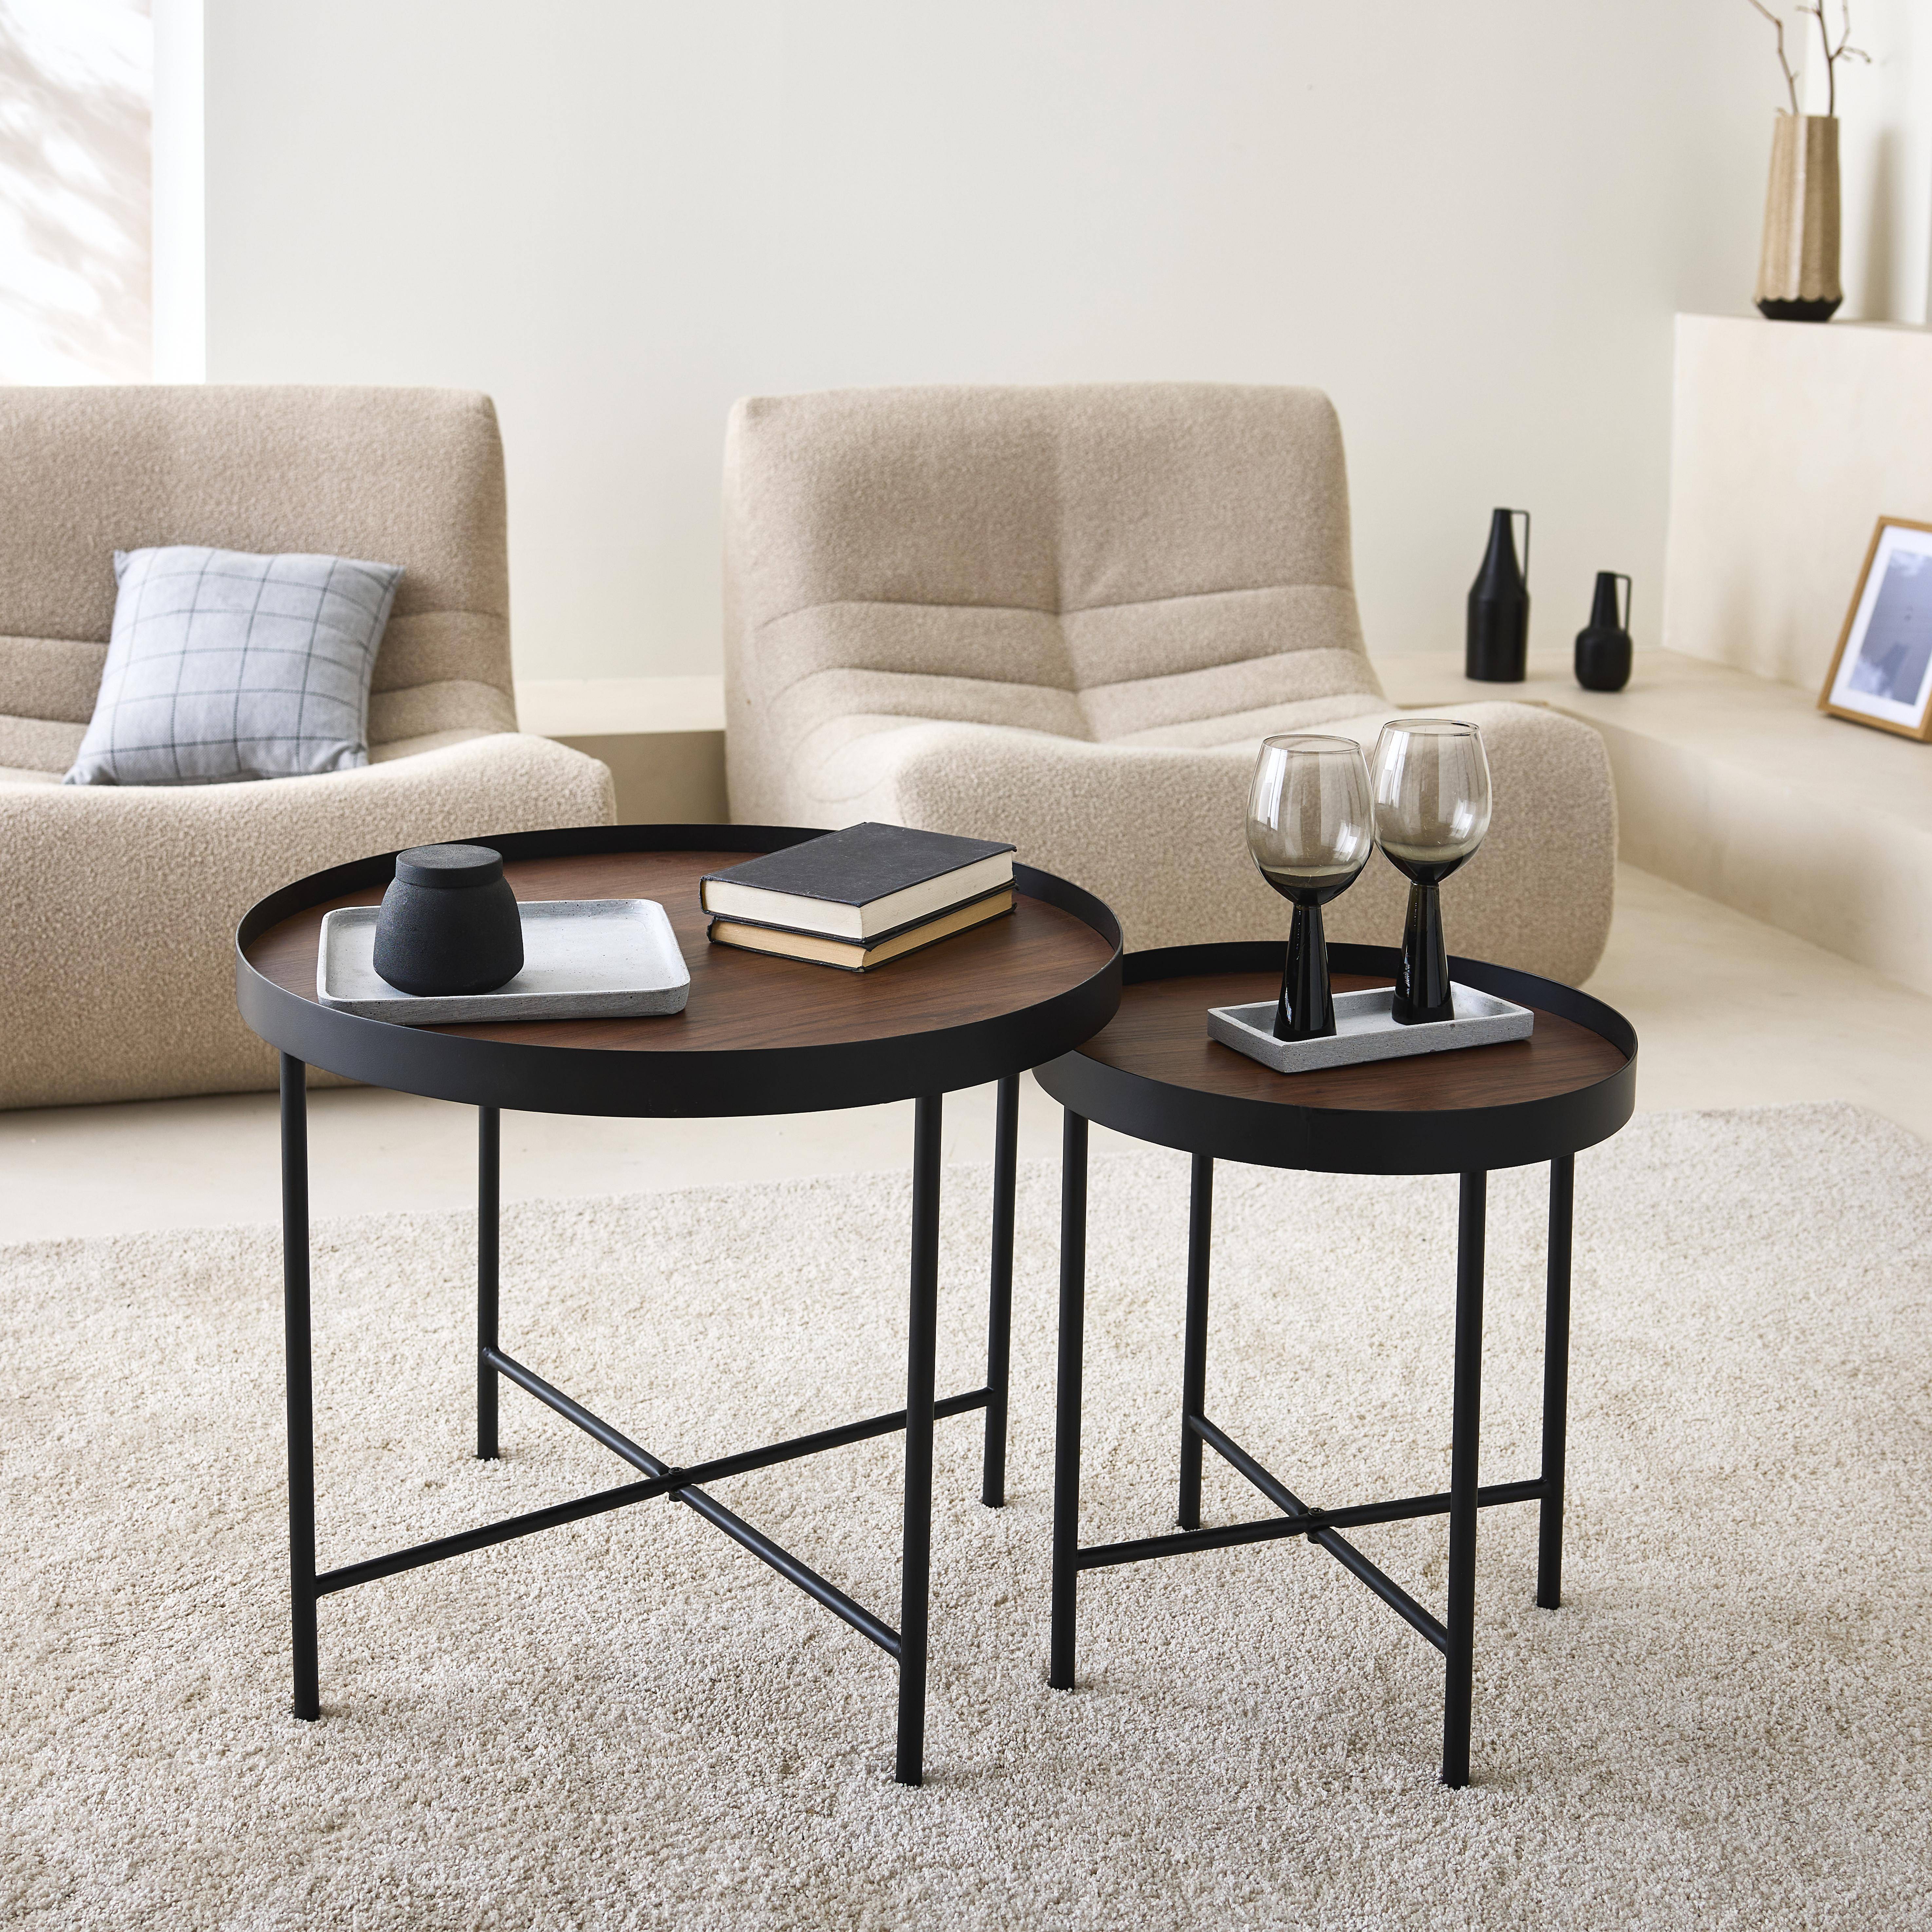 Set of 2 practical round nesting tables in walnut-effect MDF with black legs,sweeek,Photo1